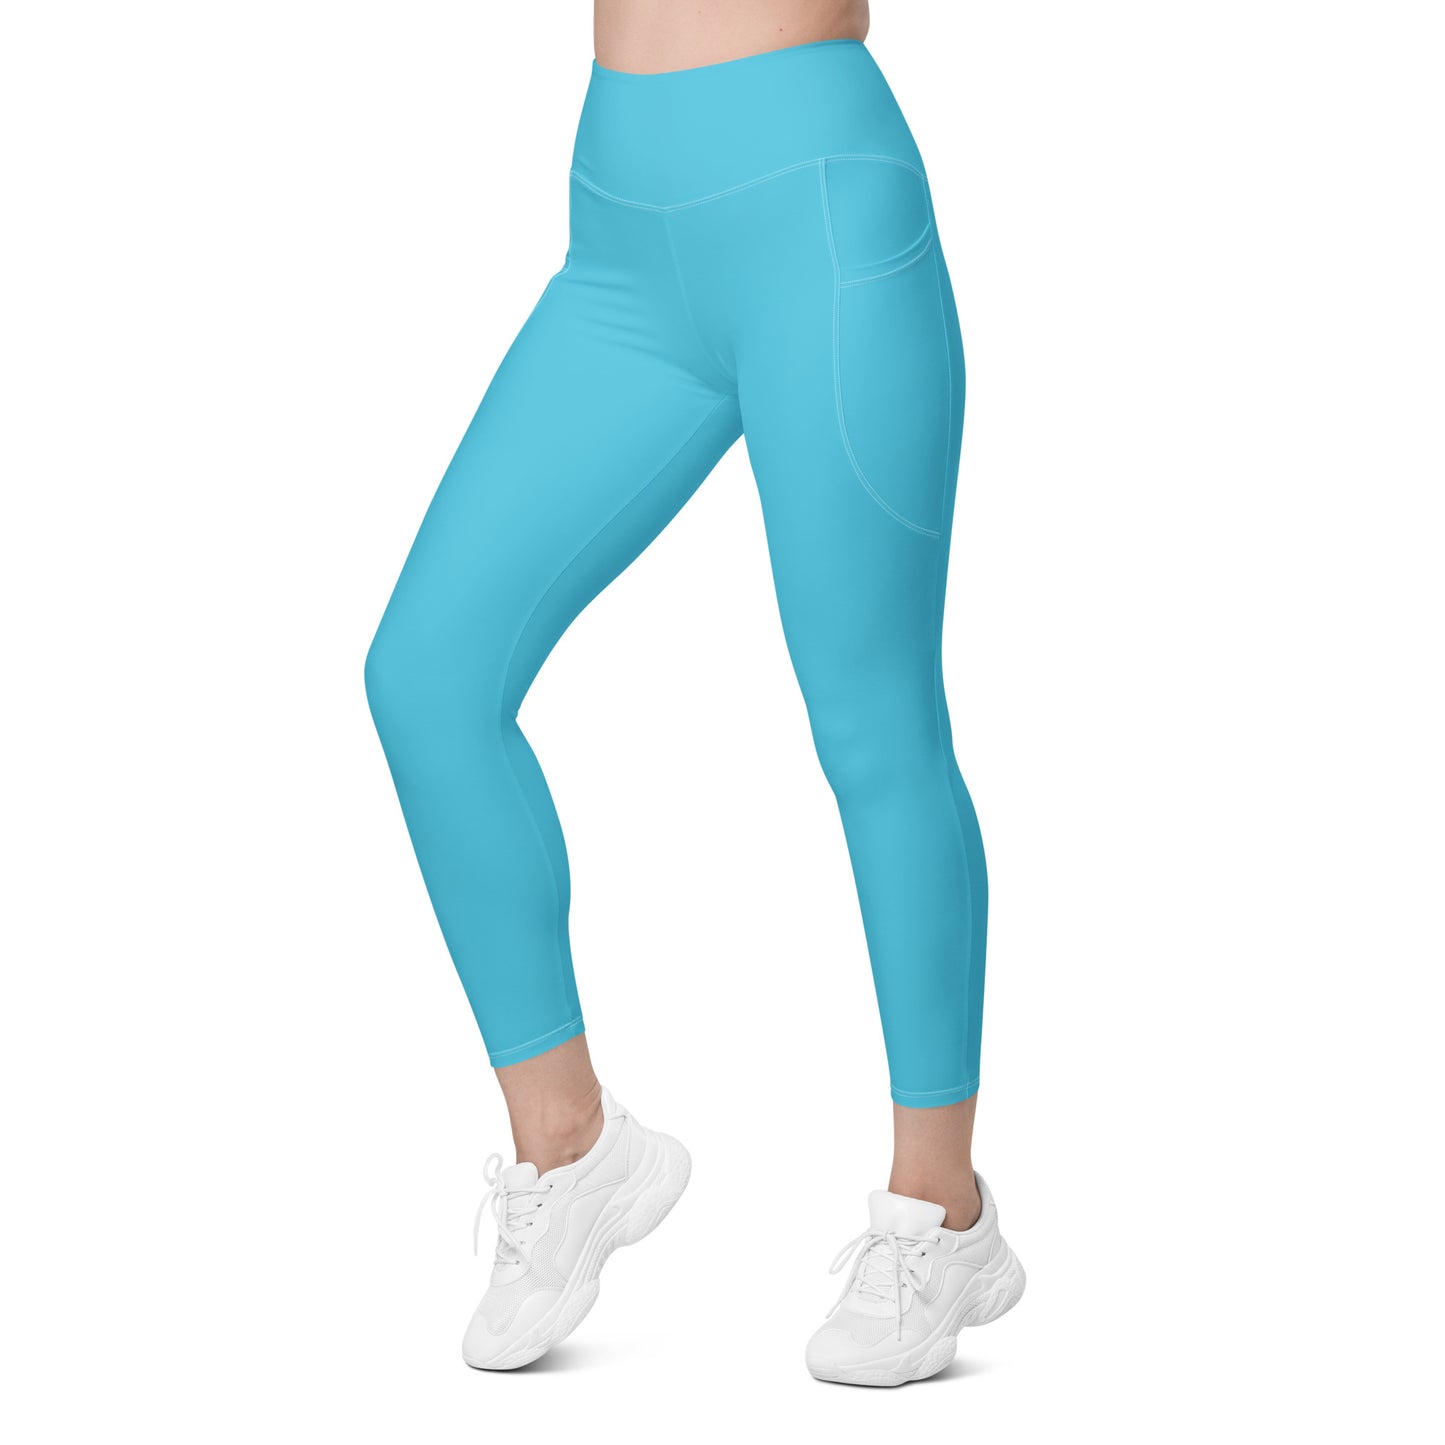 Malocchio Solid Color High Waist 7/8 Recycled Yoga Leggings / Yoga Pants with Pockets